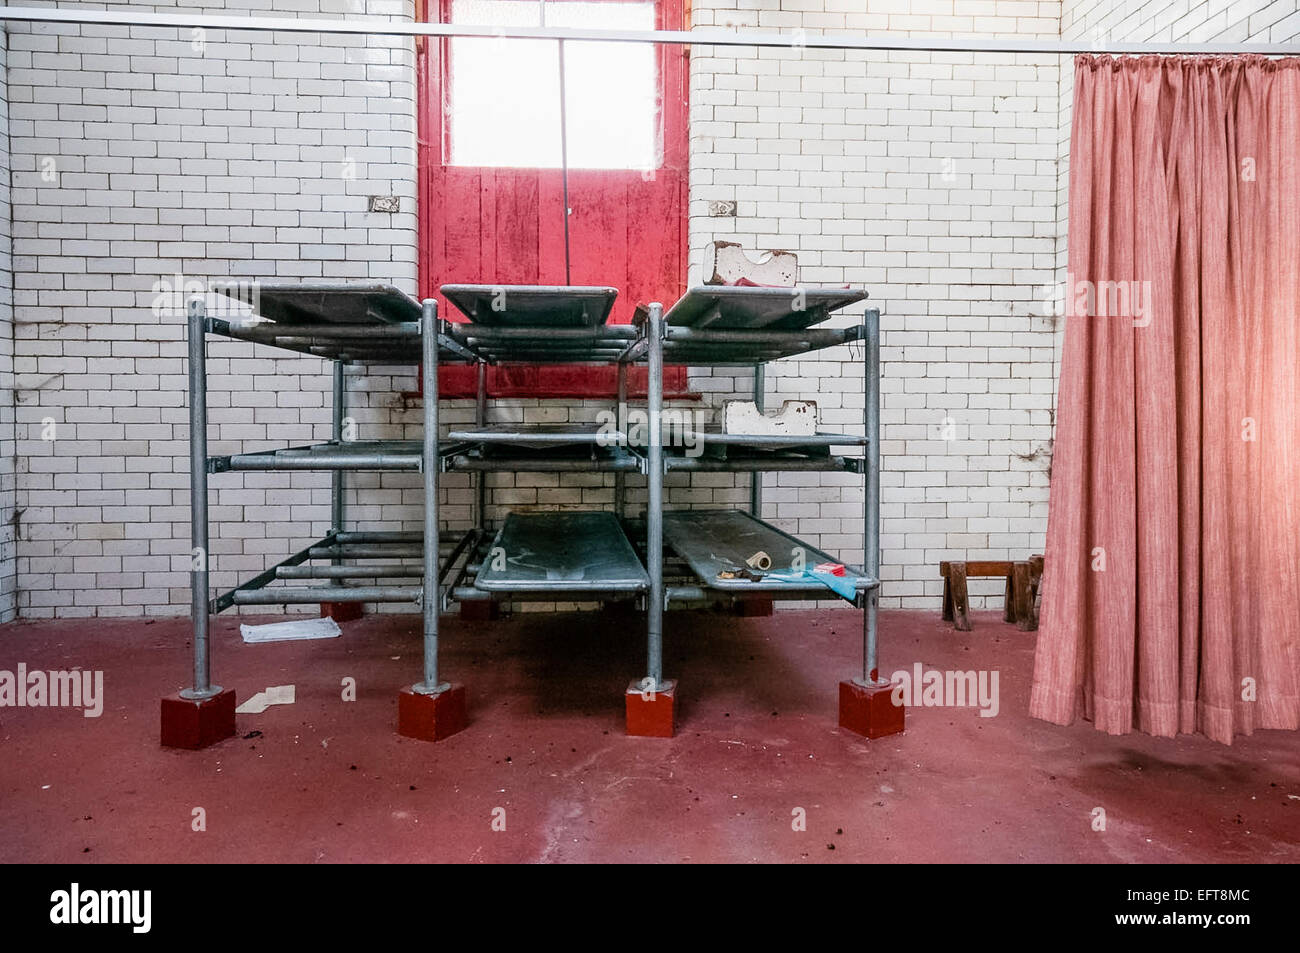 Tables in a mortuary for storing bodies. Stock Photo